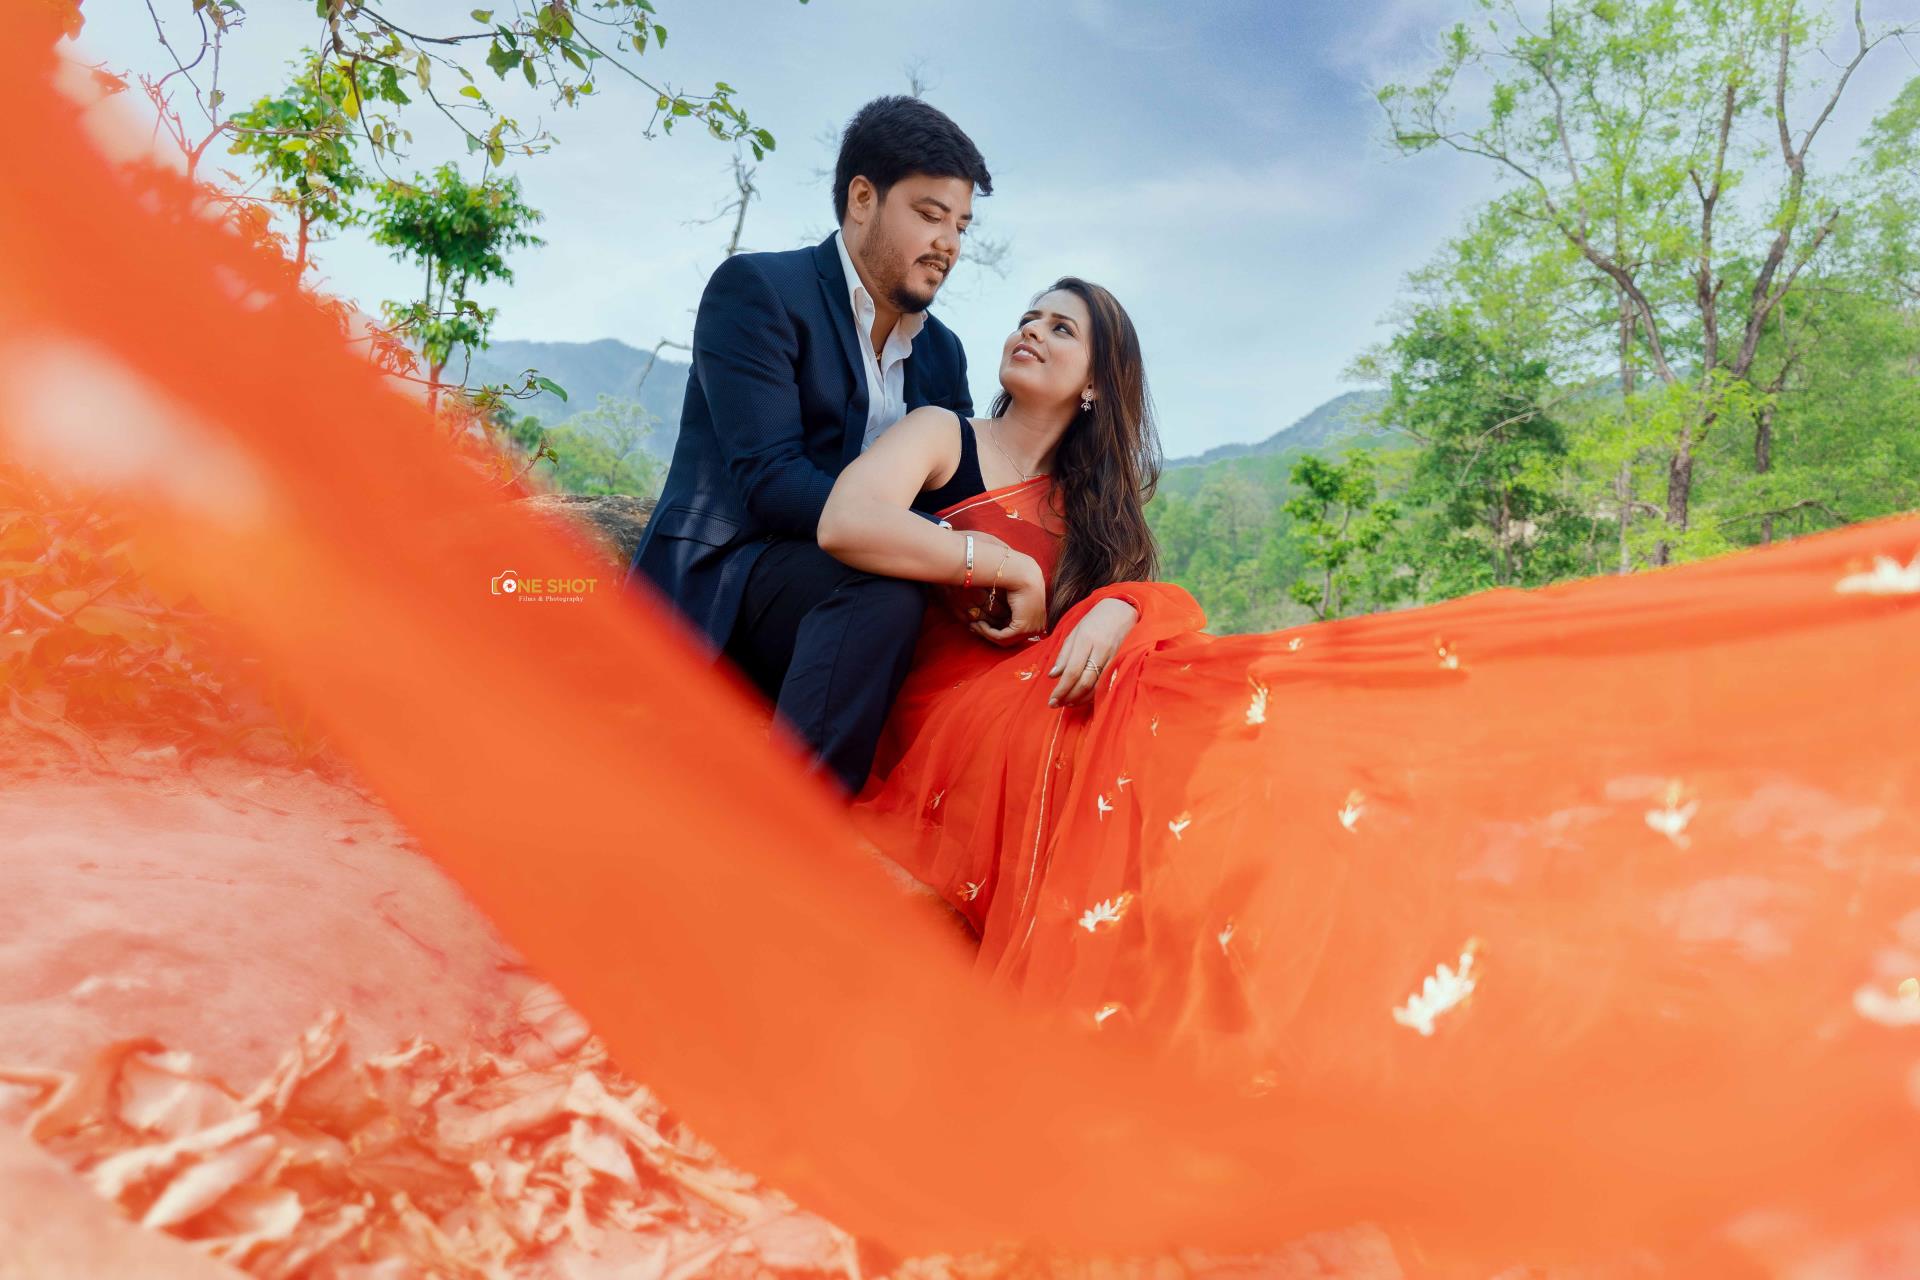 One Shot Films is a best wedding photographer in Gorakhpur. Providing services like pre wedding photography, engagement photography, video production of music videos and creative photography & videography